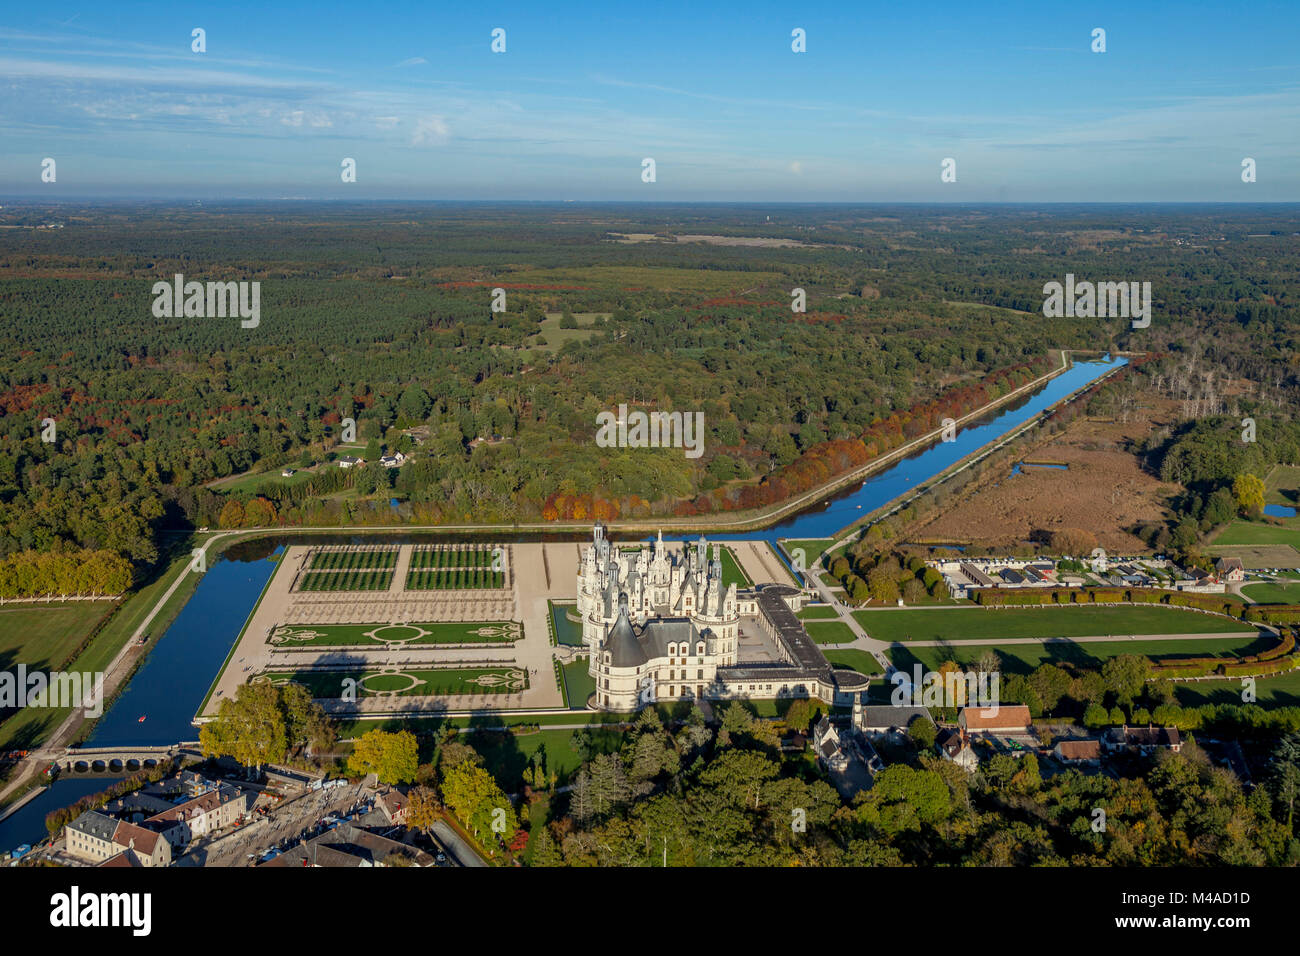 Aerial view of the Chateau de Chambord, a Renaissance style castle registered as a UNESCO World Heritage Site and National Historic Landmark (French Ò Stock Photo